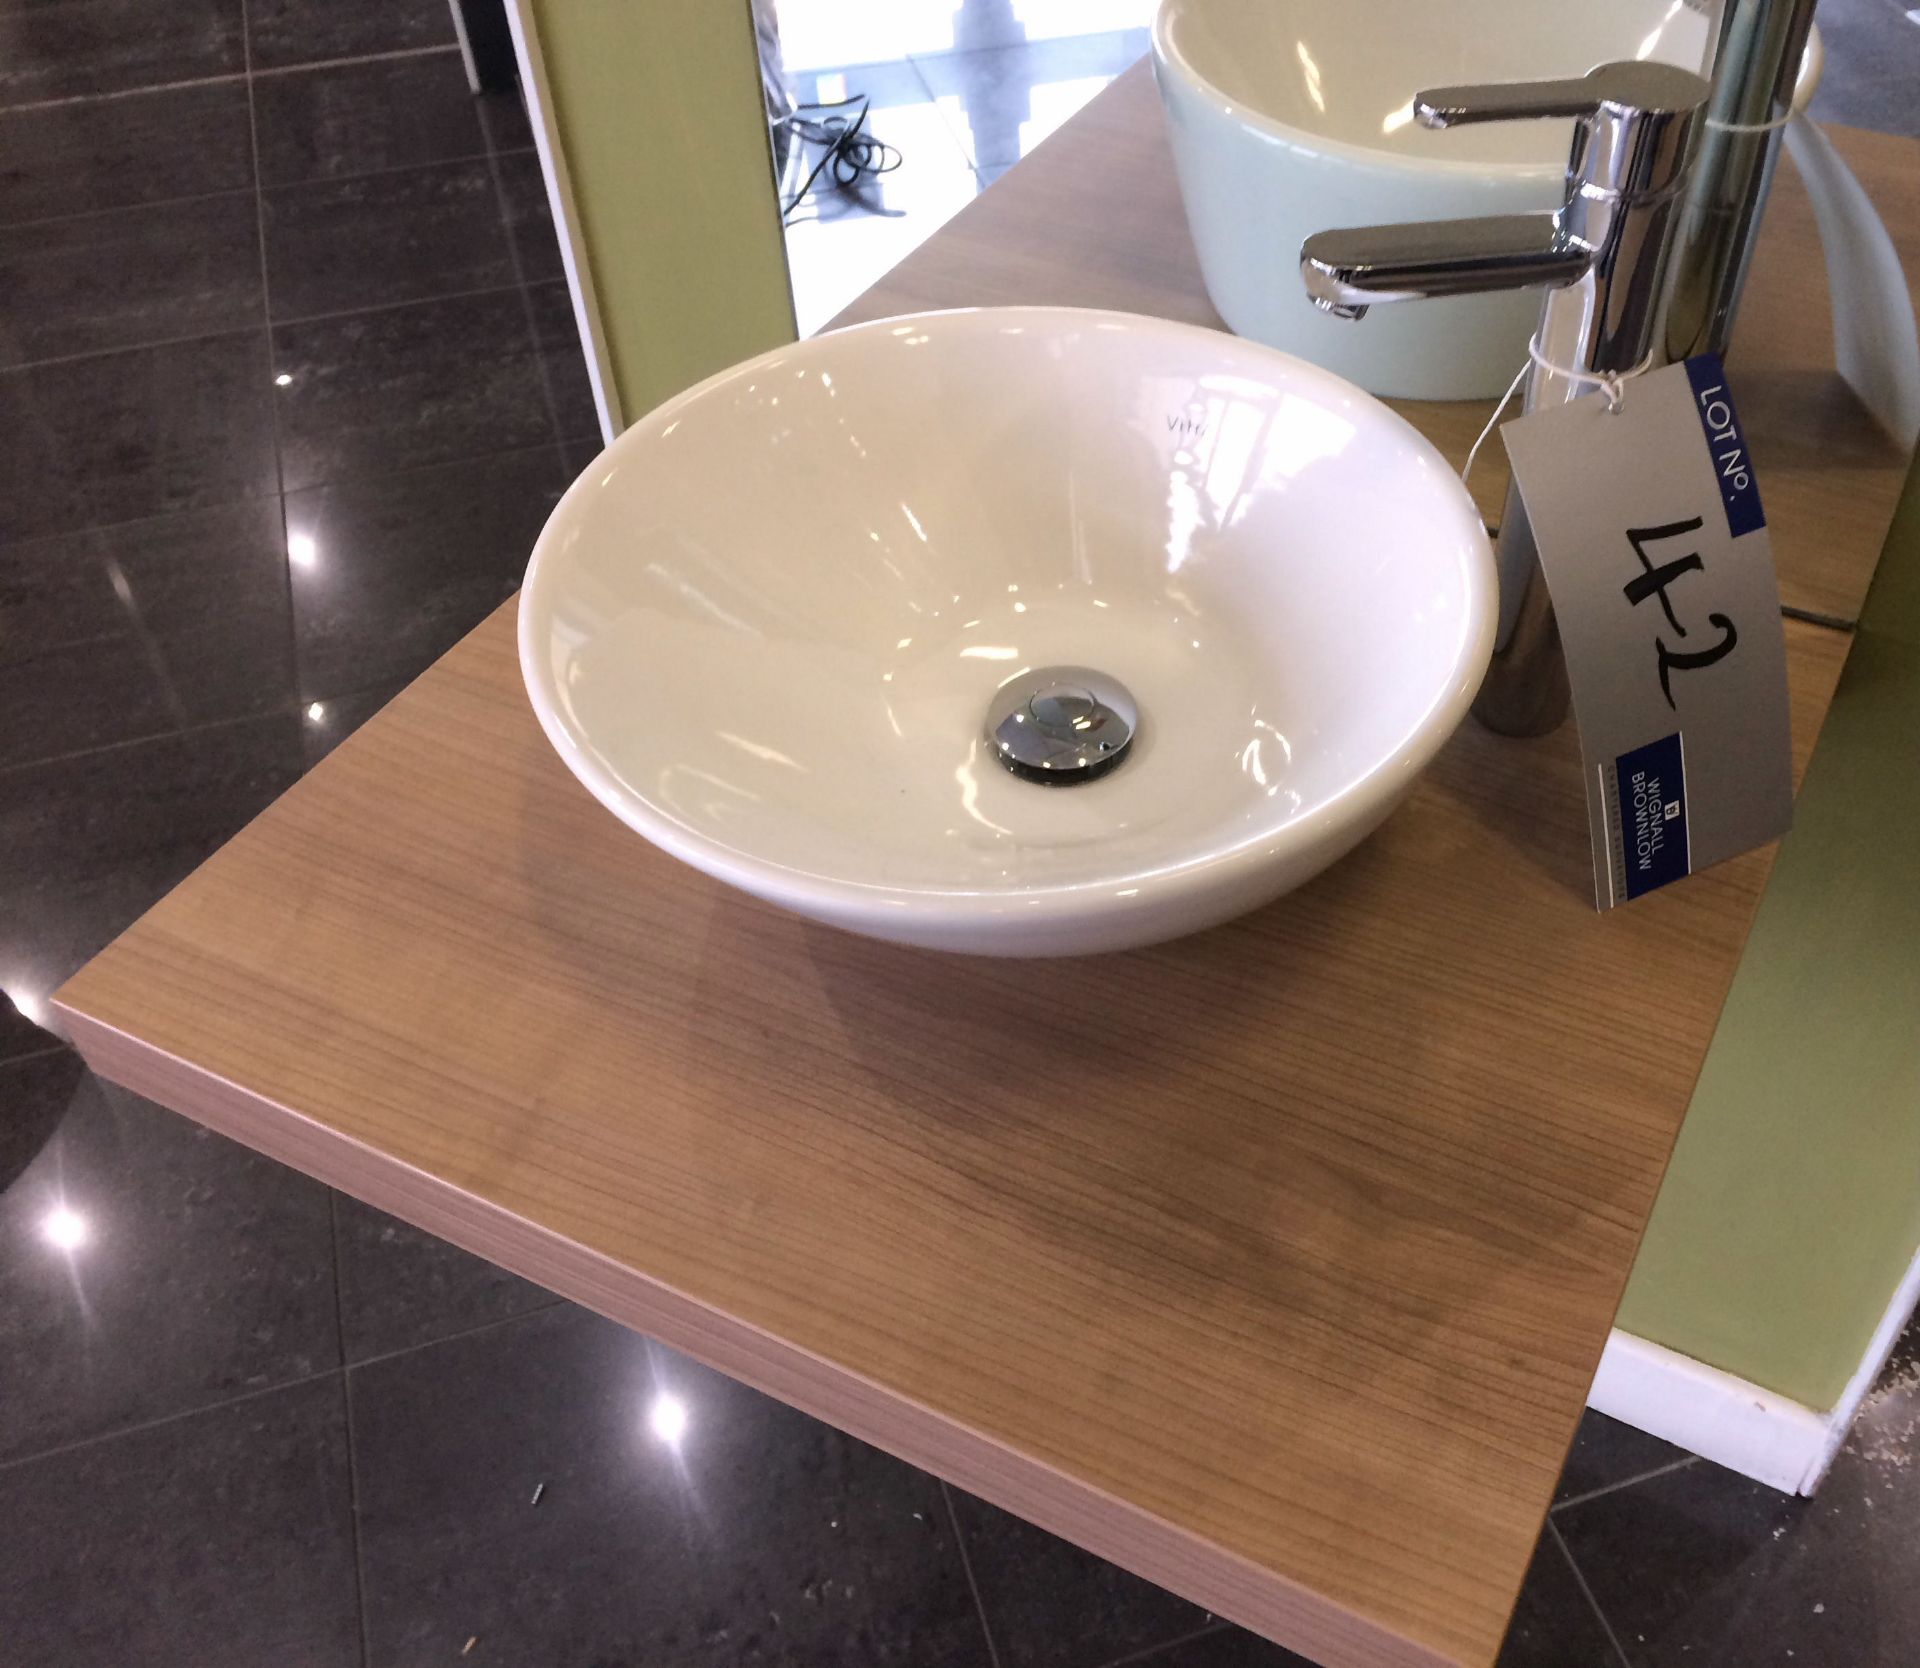 A Bathroom Display comprising Vitra Geo 38cm Round Bowl with Chrome Clicker Waste and Luxor Tall